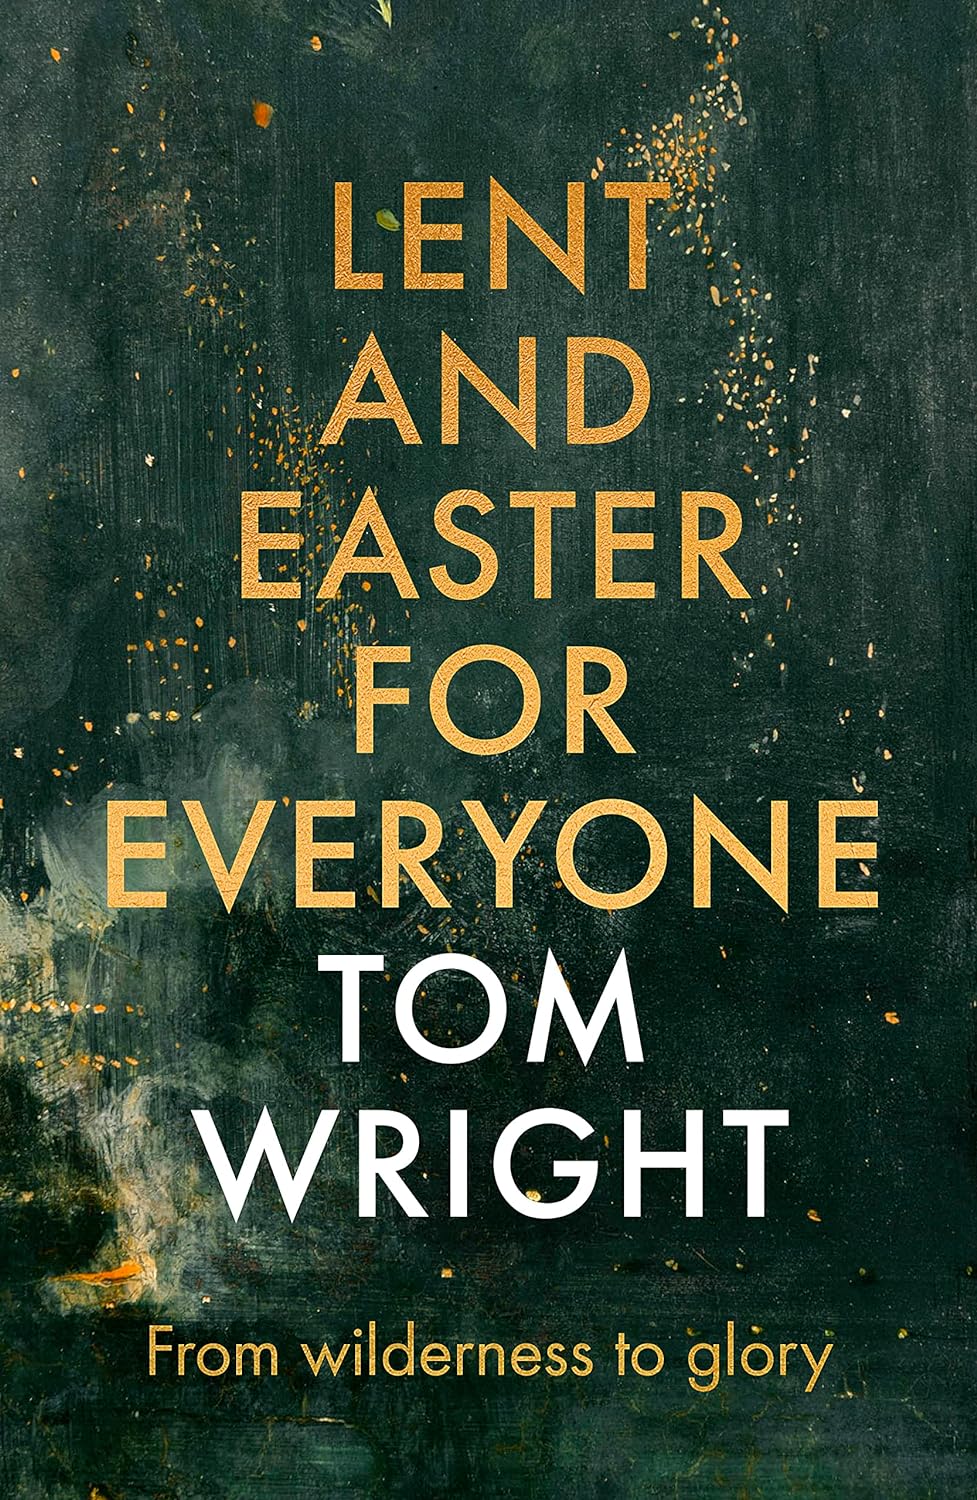 Lent and Easter for Everyone, Tom Wright